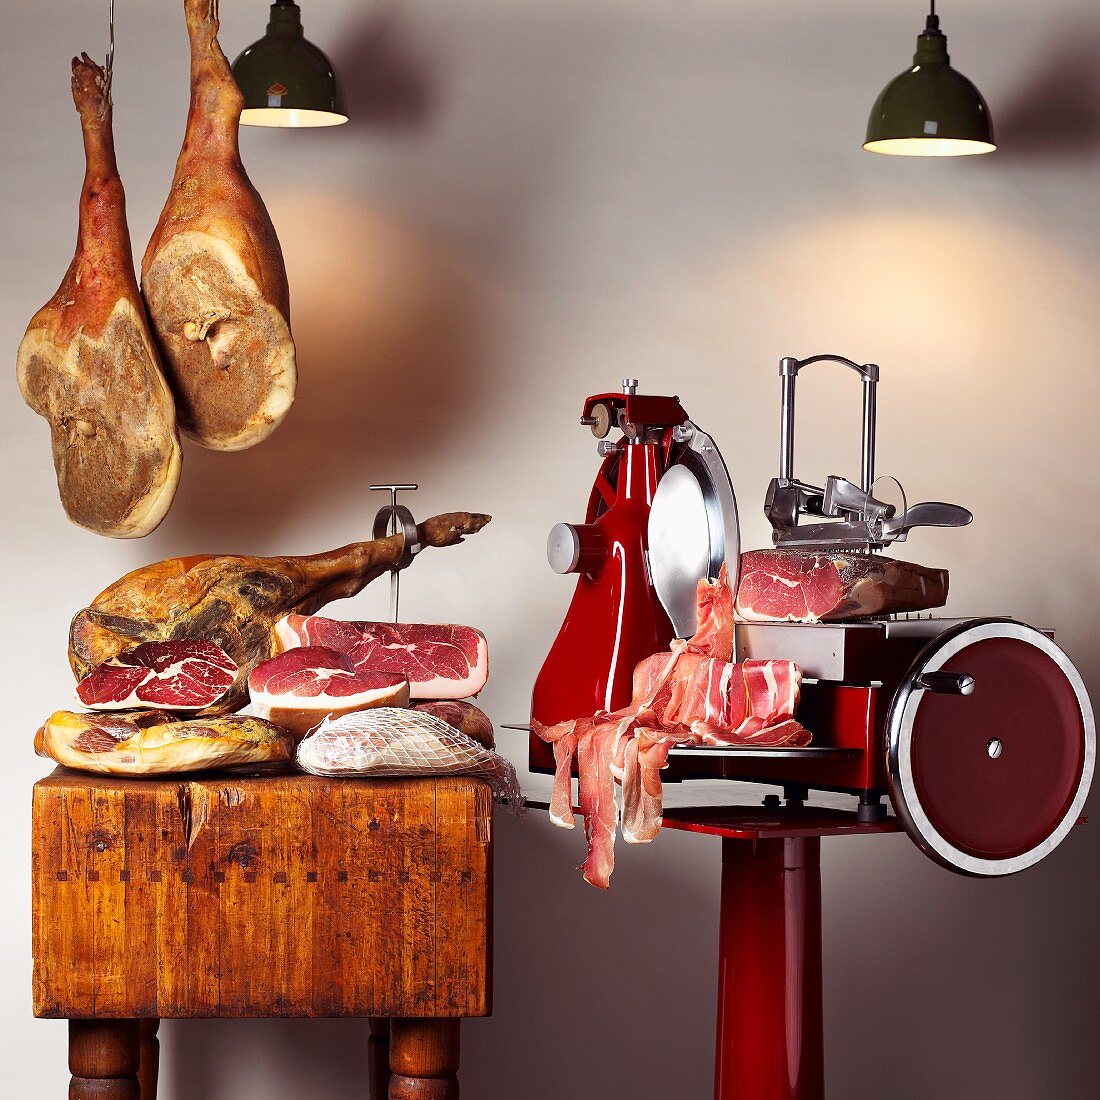 An arrangement of various raw hams and a sewing machine